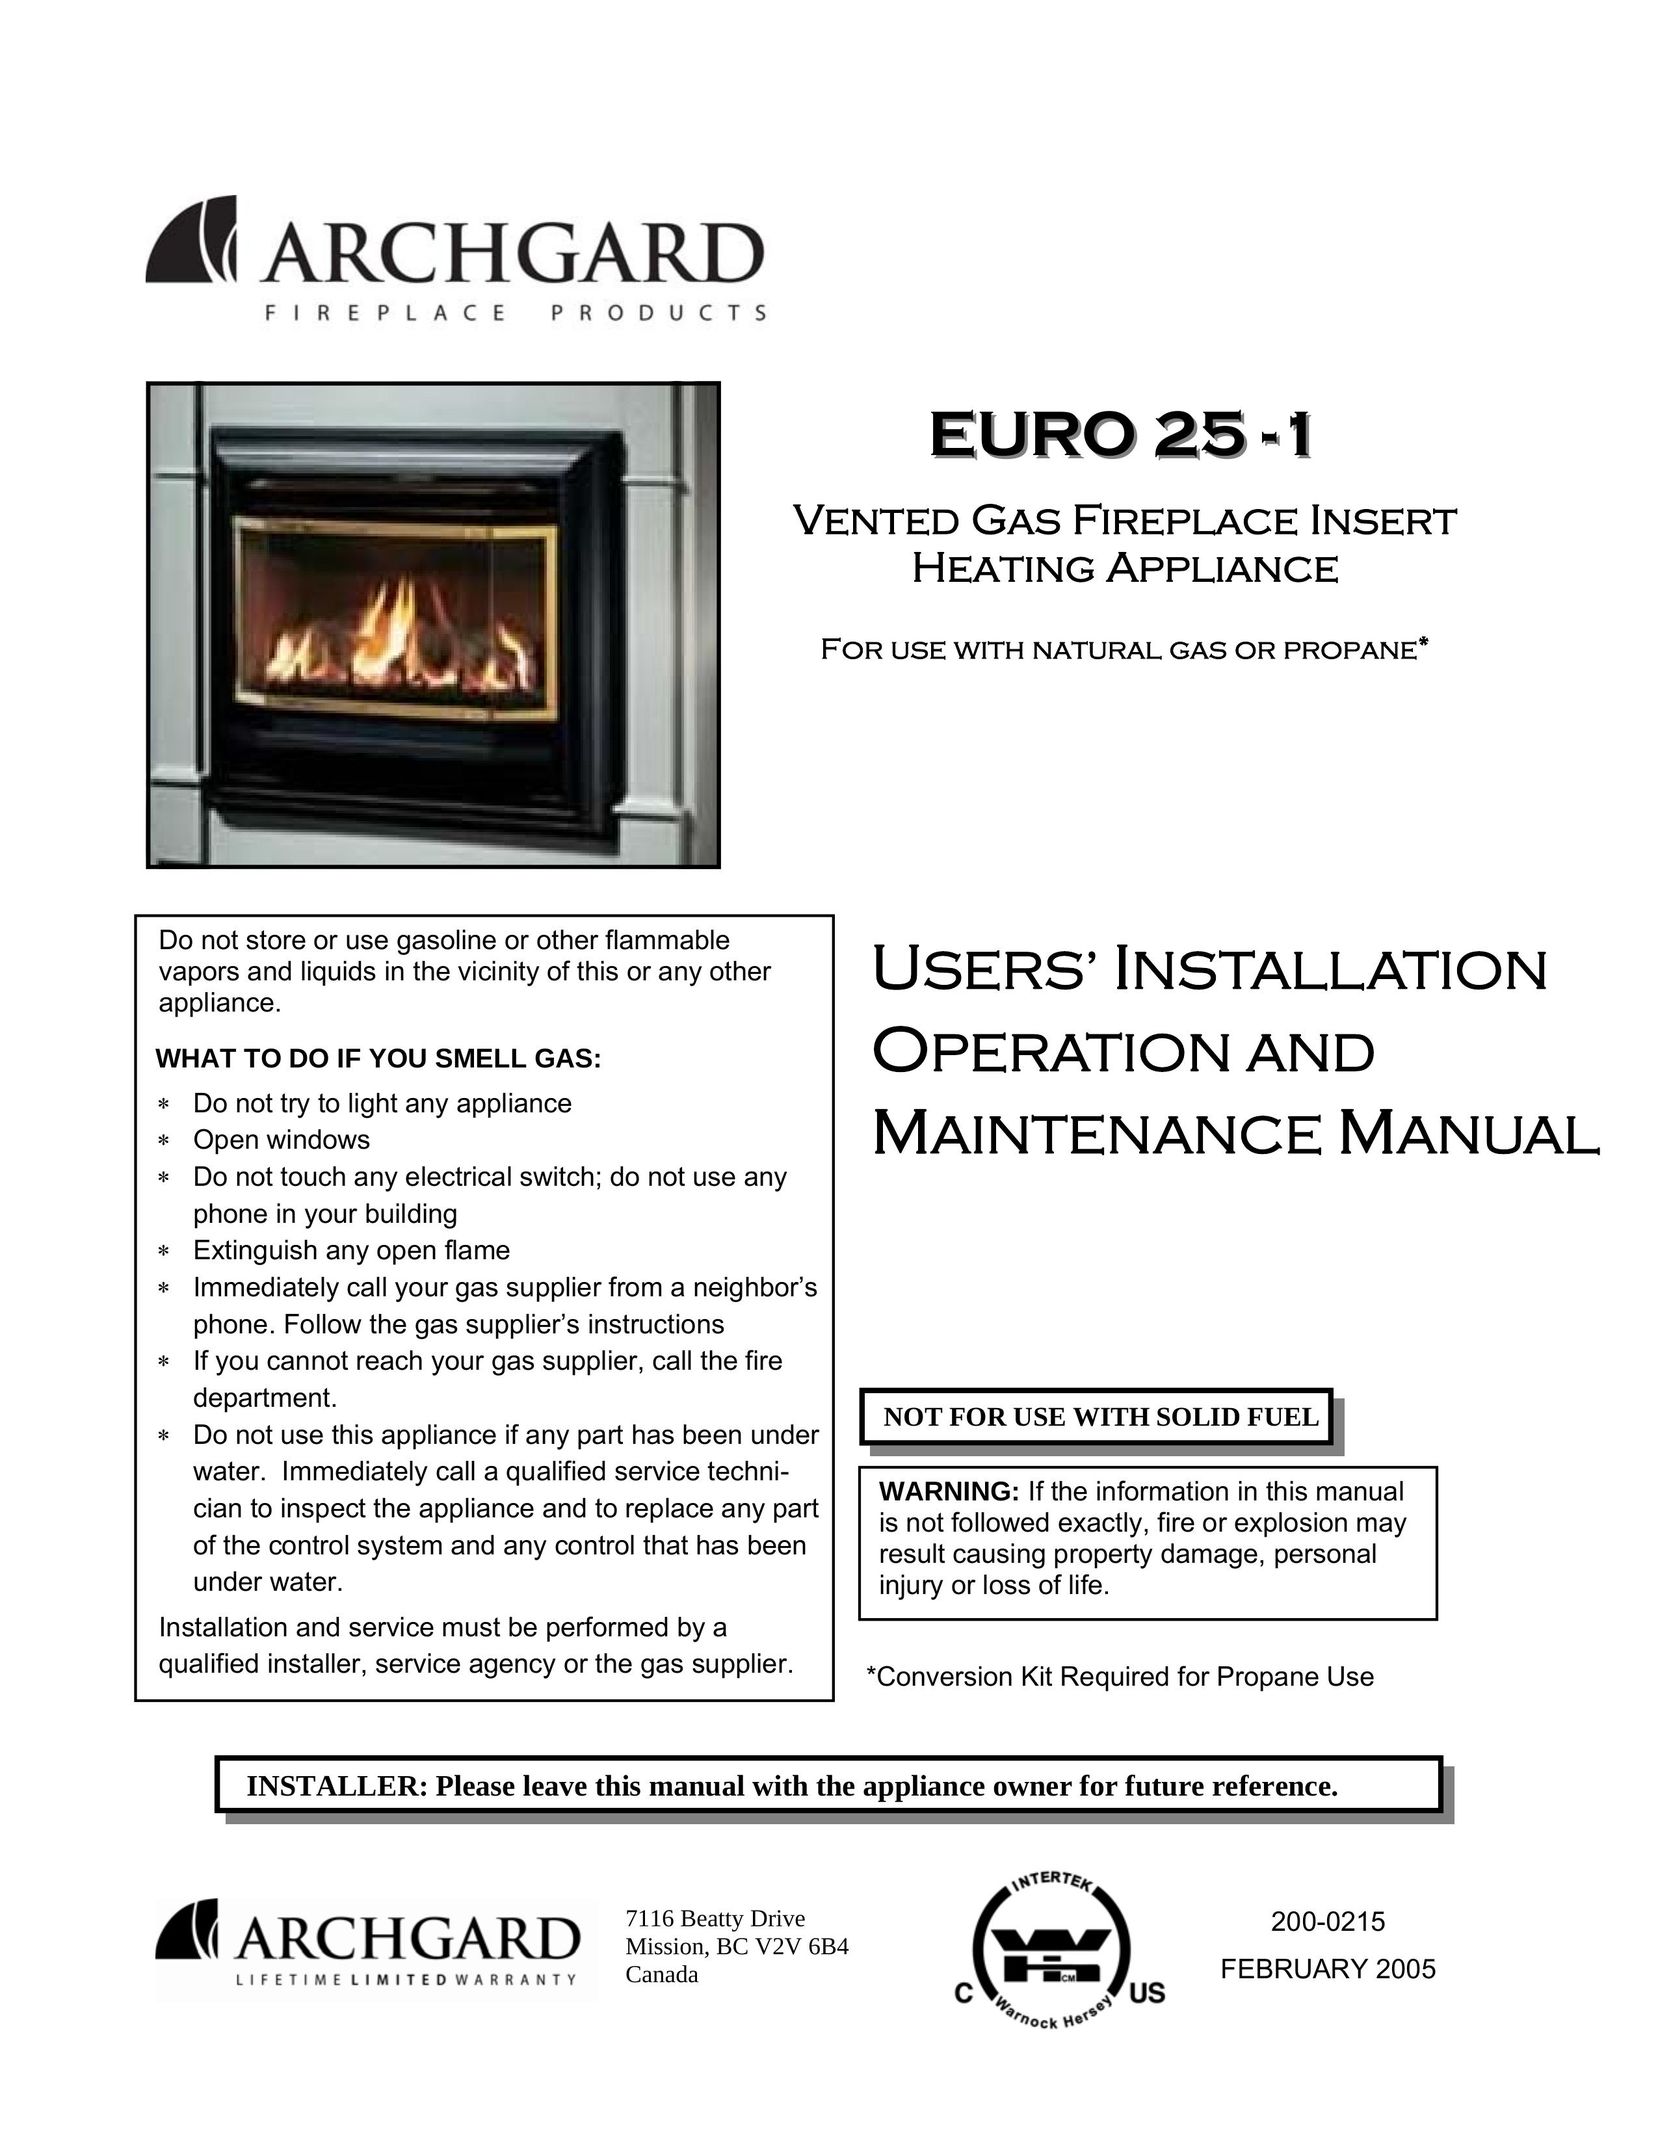 Delkin Devices EI - 25-1 Indoor Fireplace User Manual